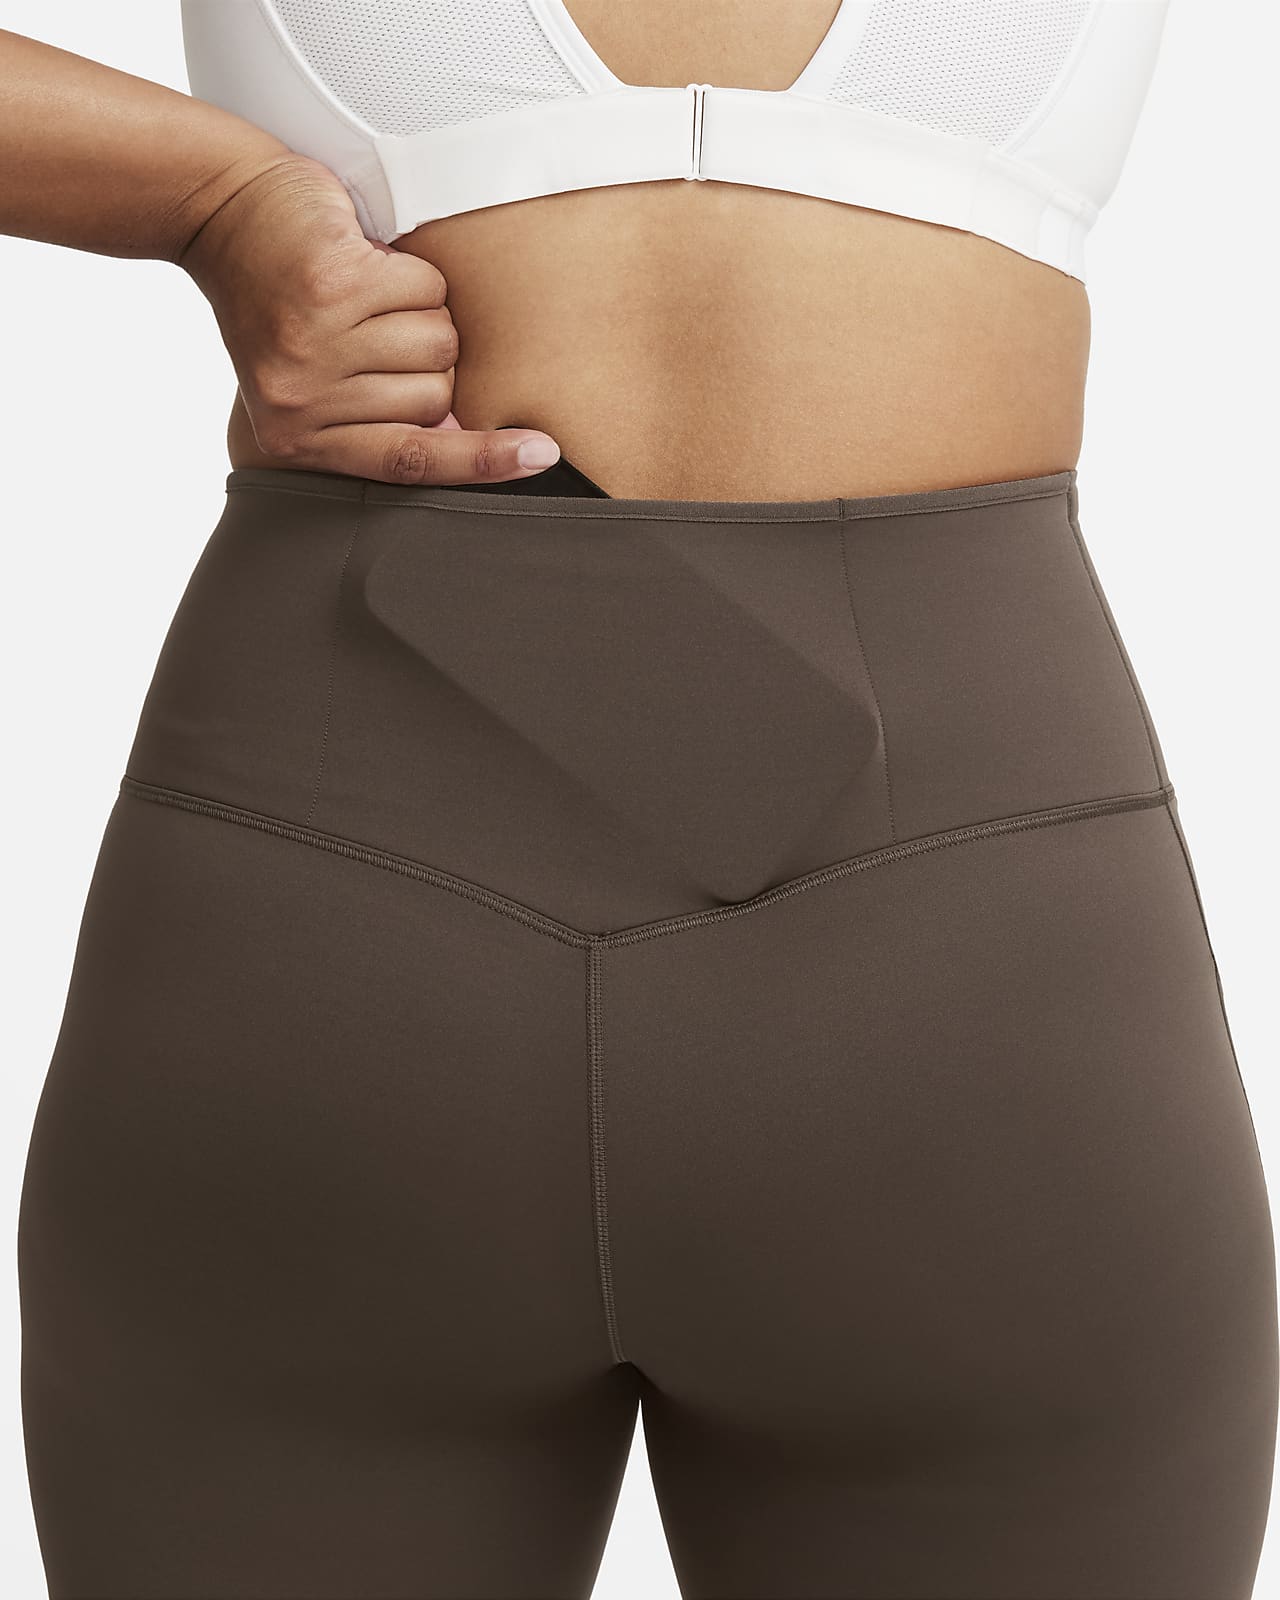 Nike Go Women's Firm-Support High-Waisted Leggings with Pockets